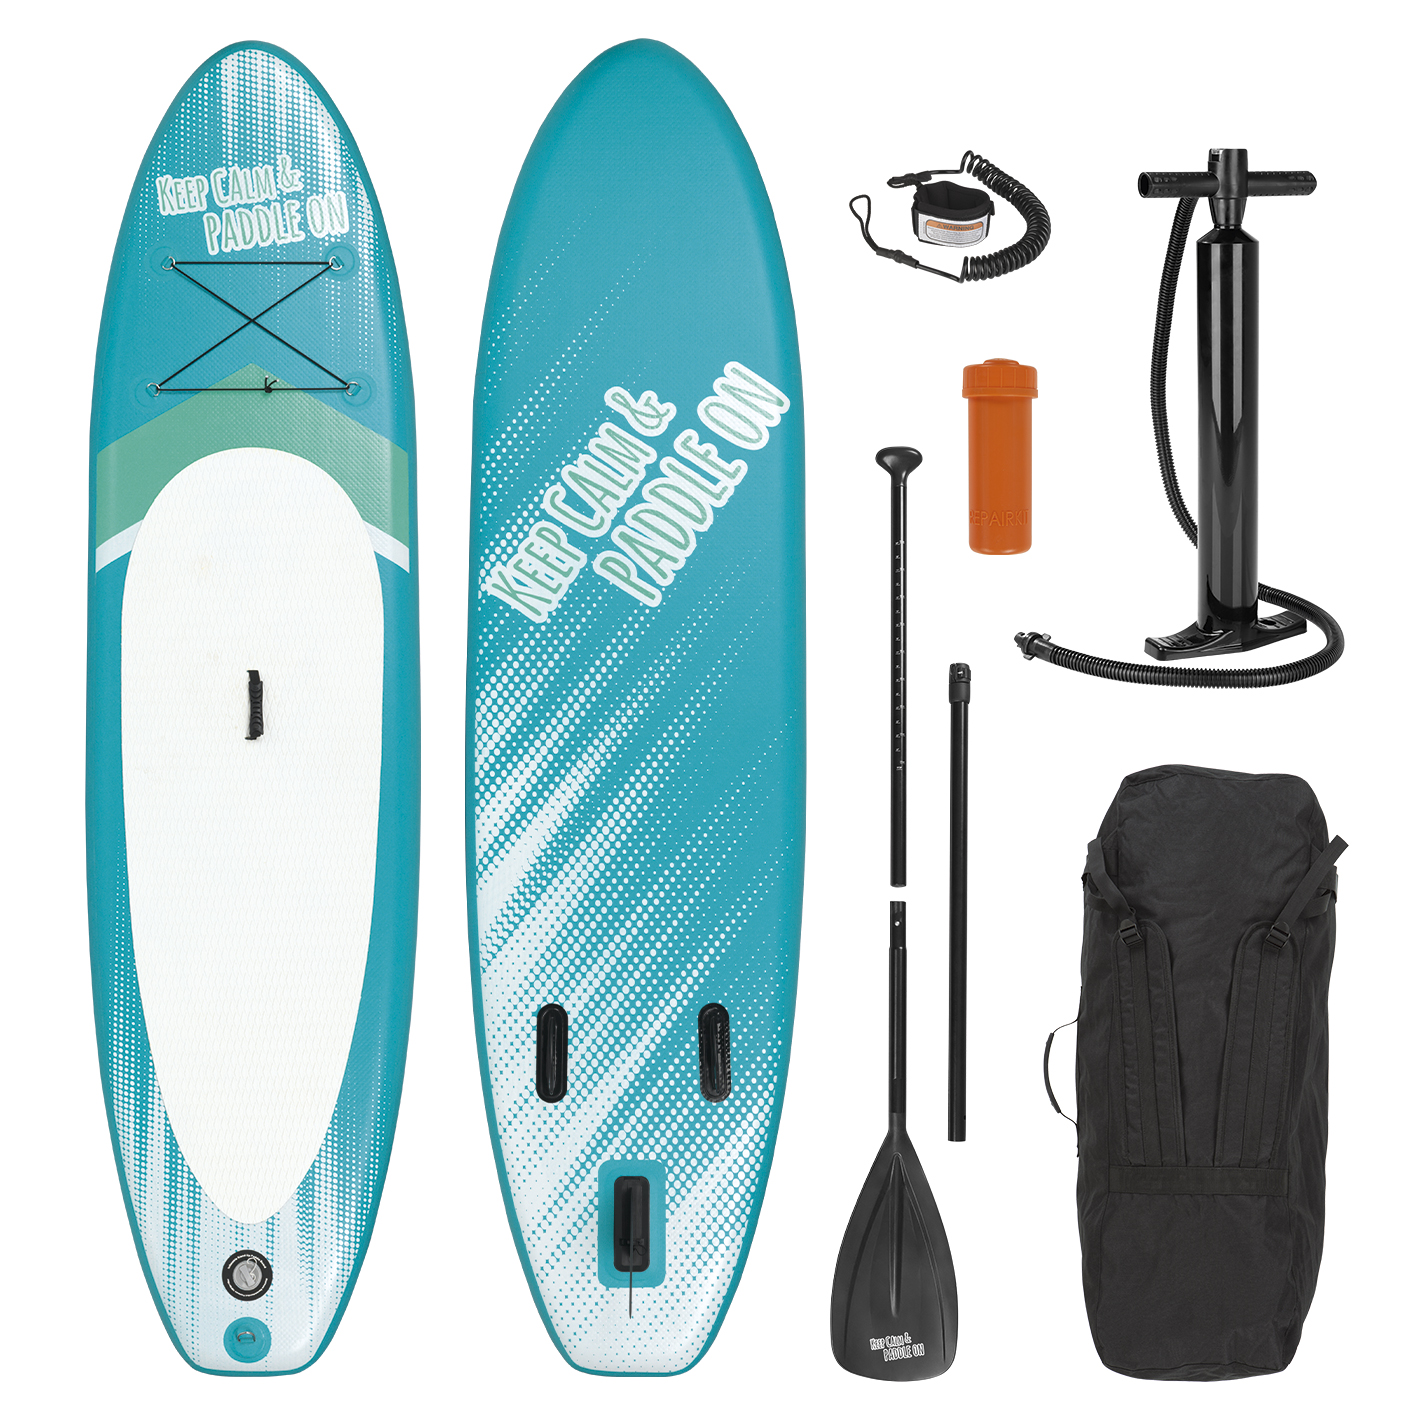 MAXXMEE 06007 Stand-Up mehrfarbig Paddle-Board